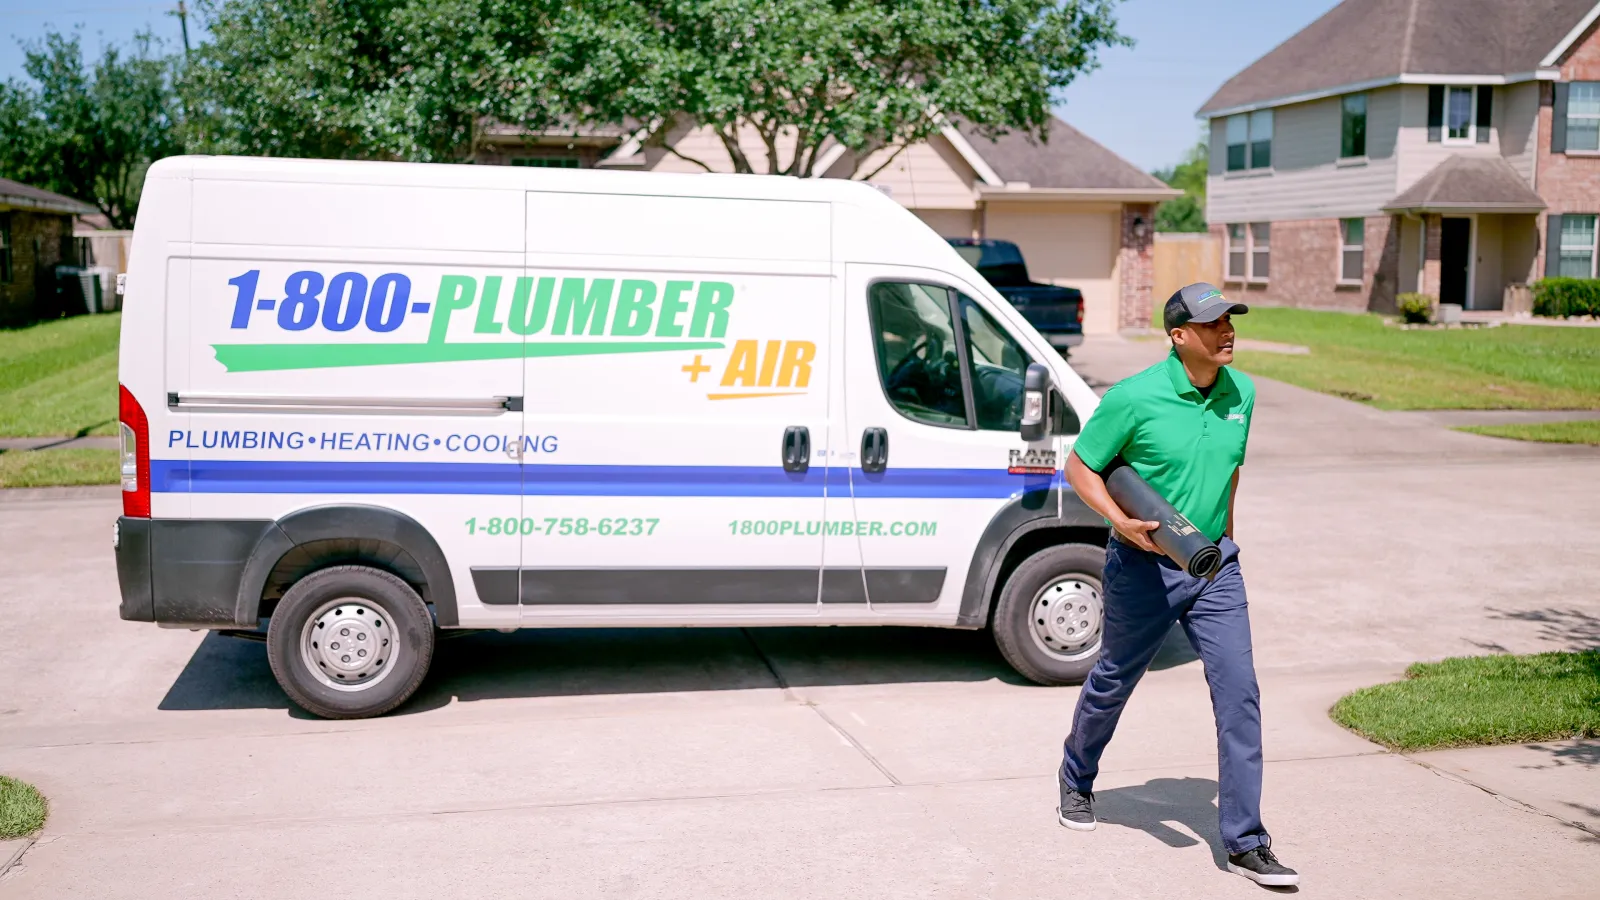 a plumber and a van